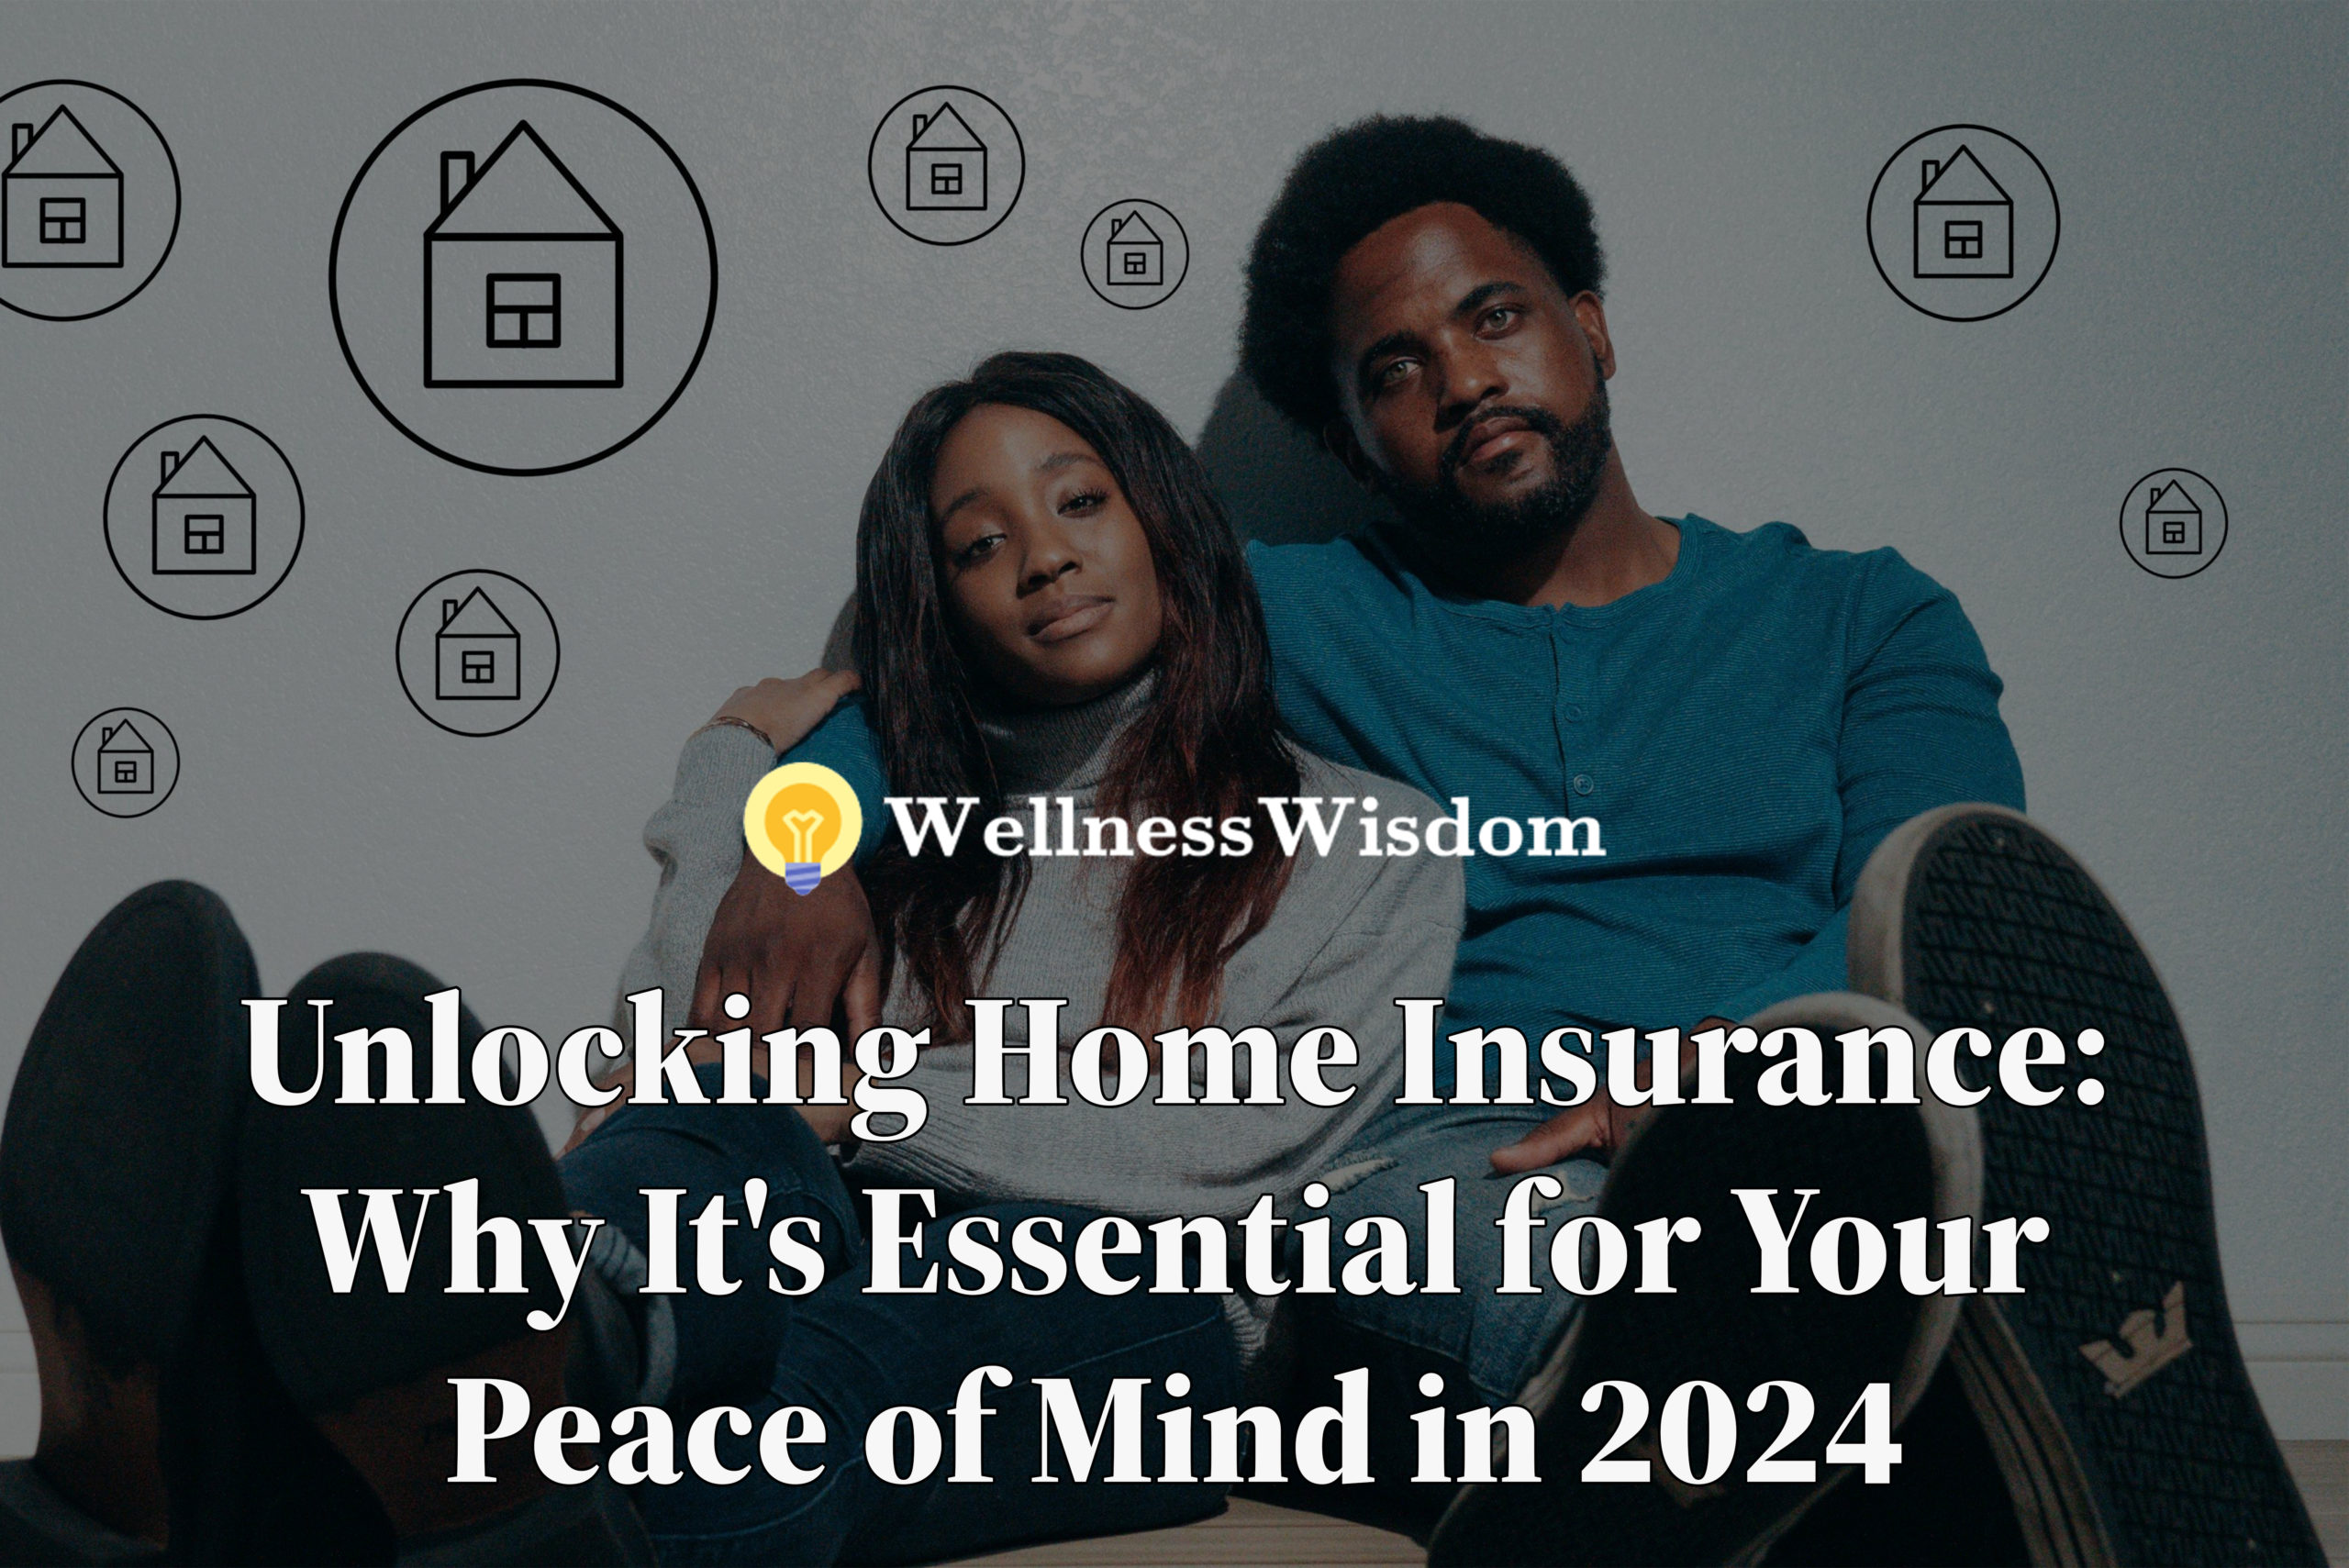 home insurance, homeowner's insurance, property insurance, insurance coverage, dwelling coverage, personal property coverage, liability coverage, additional living expenses coverage, financial protection, peace of mind, insurance policy